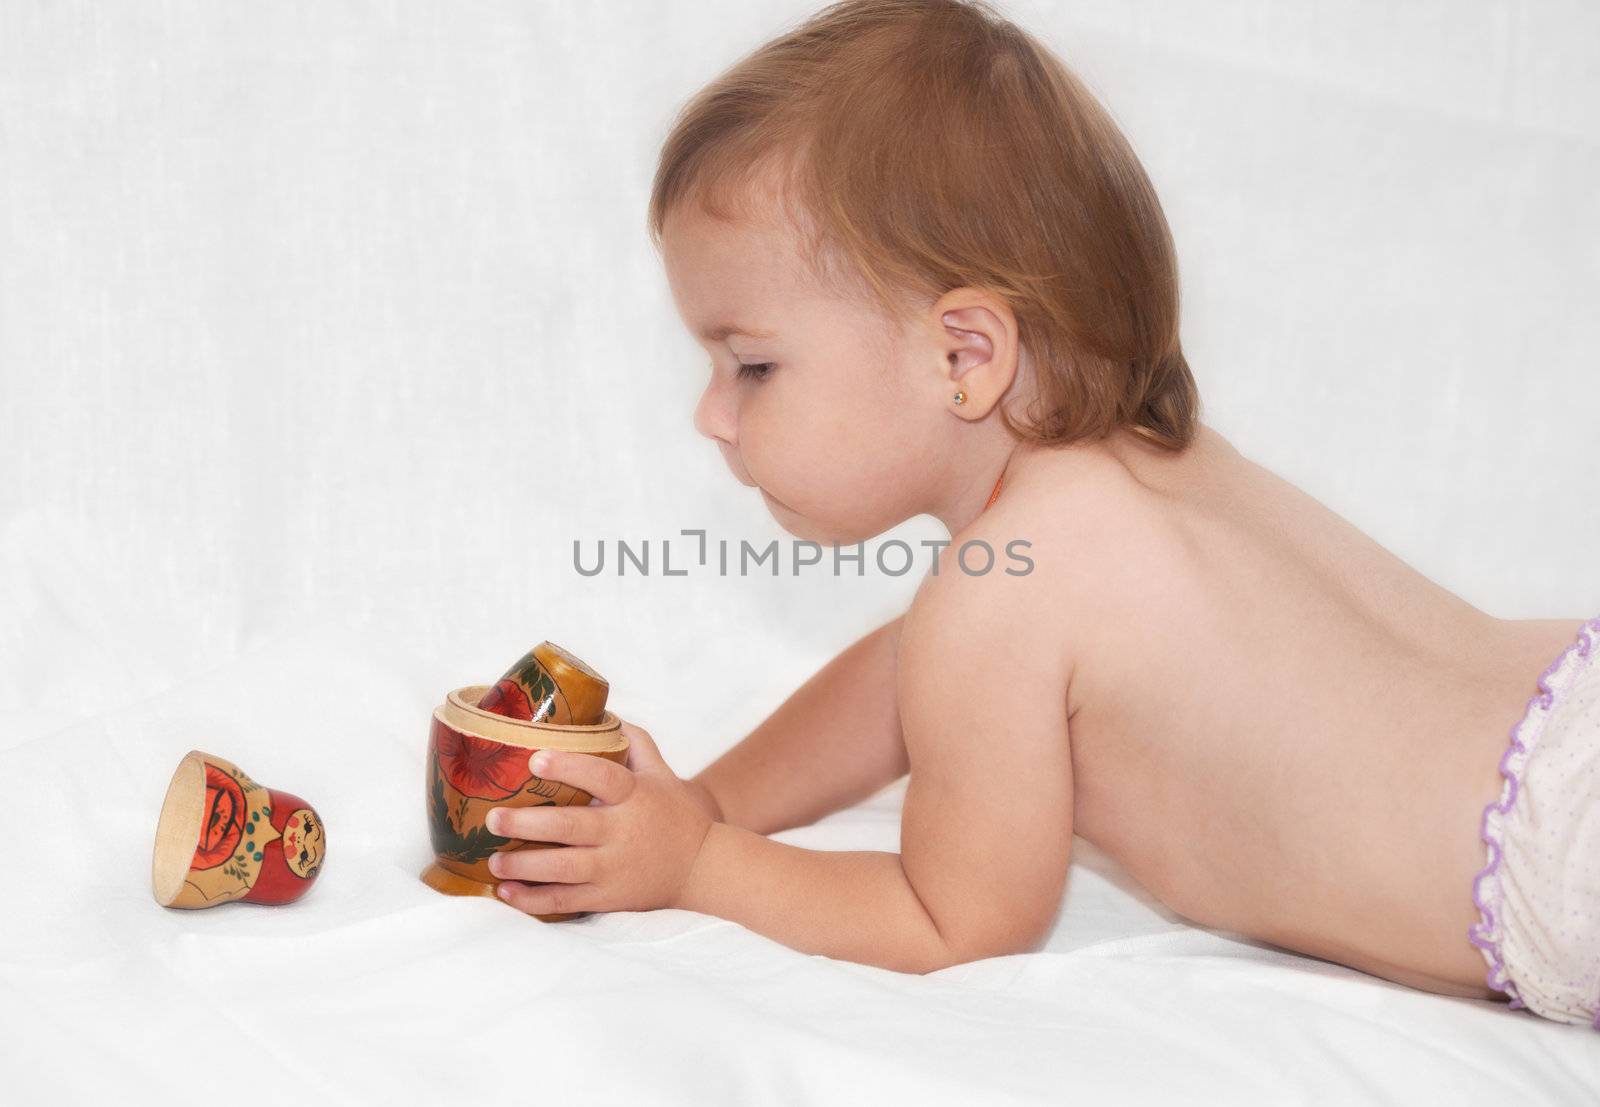 The baby and toy by petrkurgan